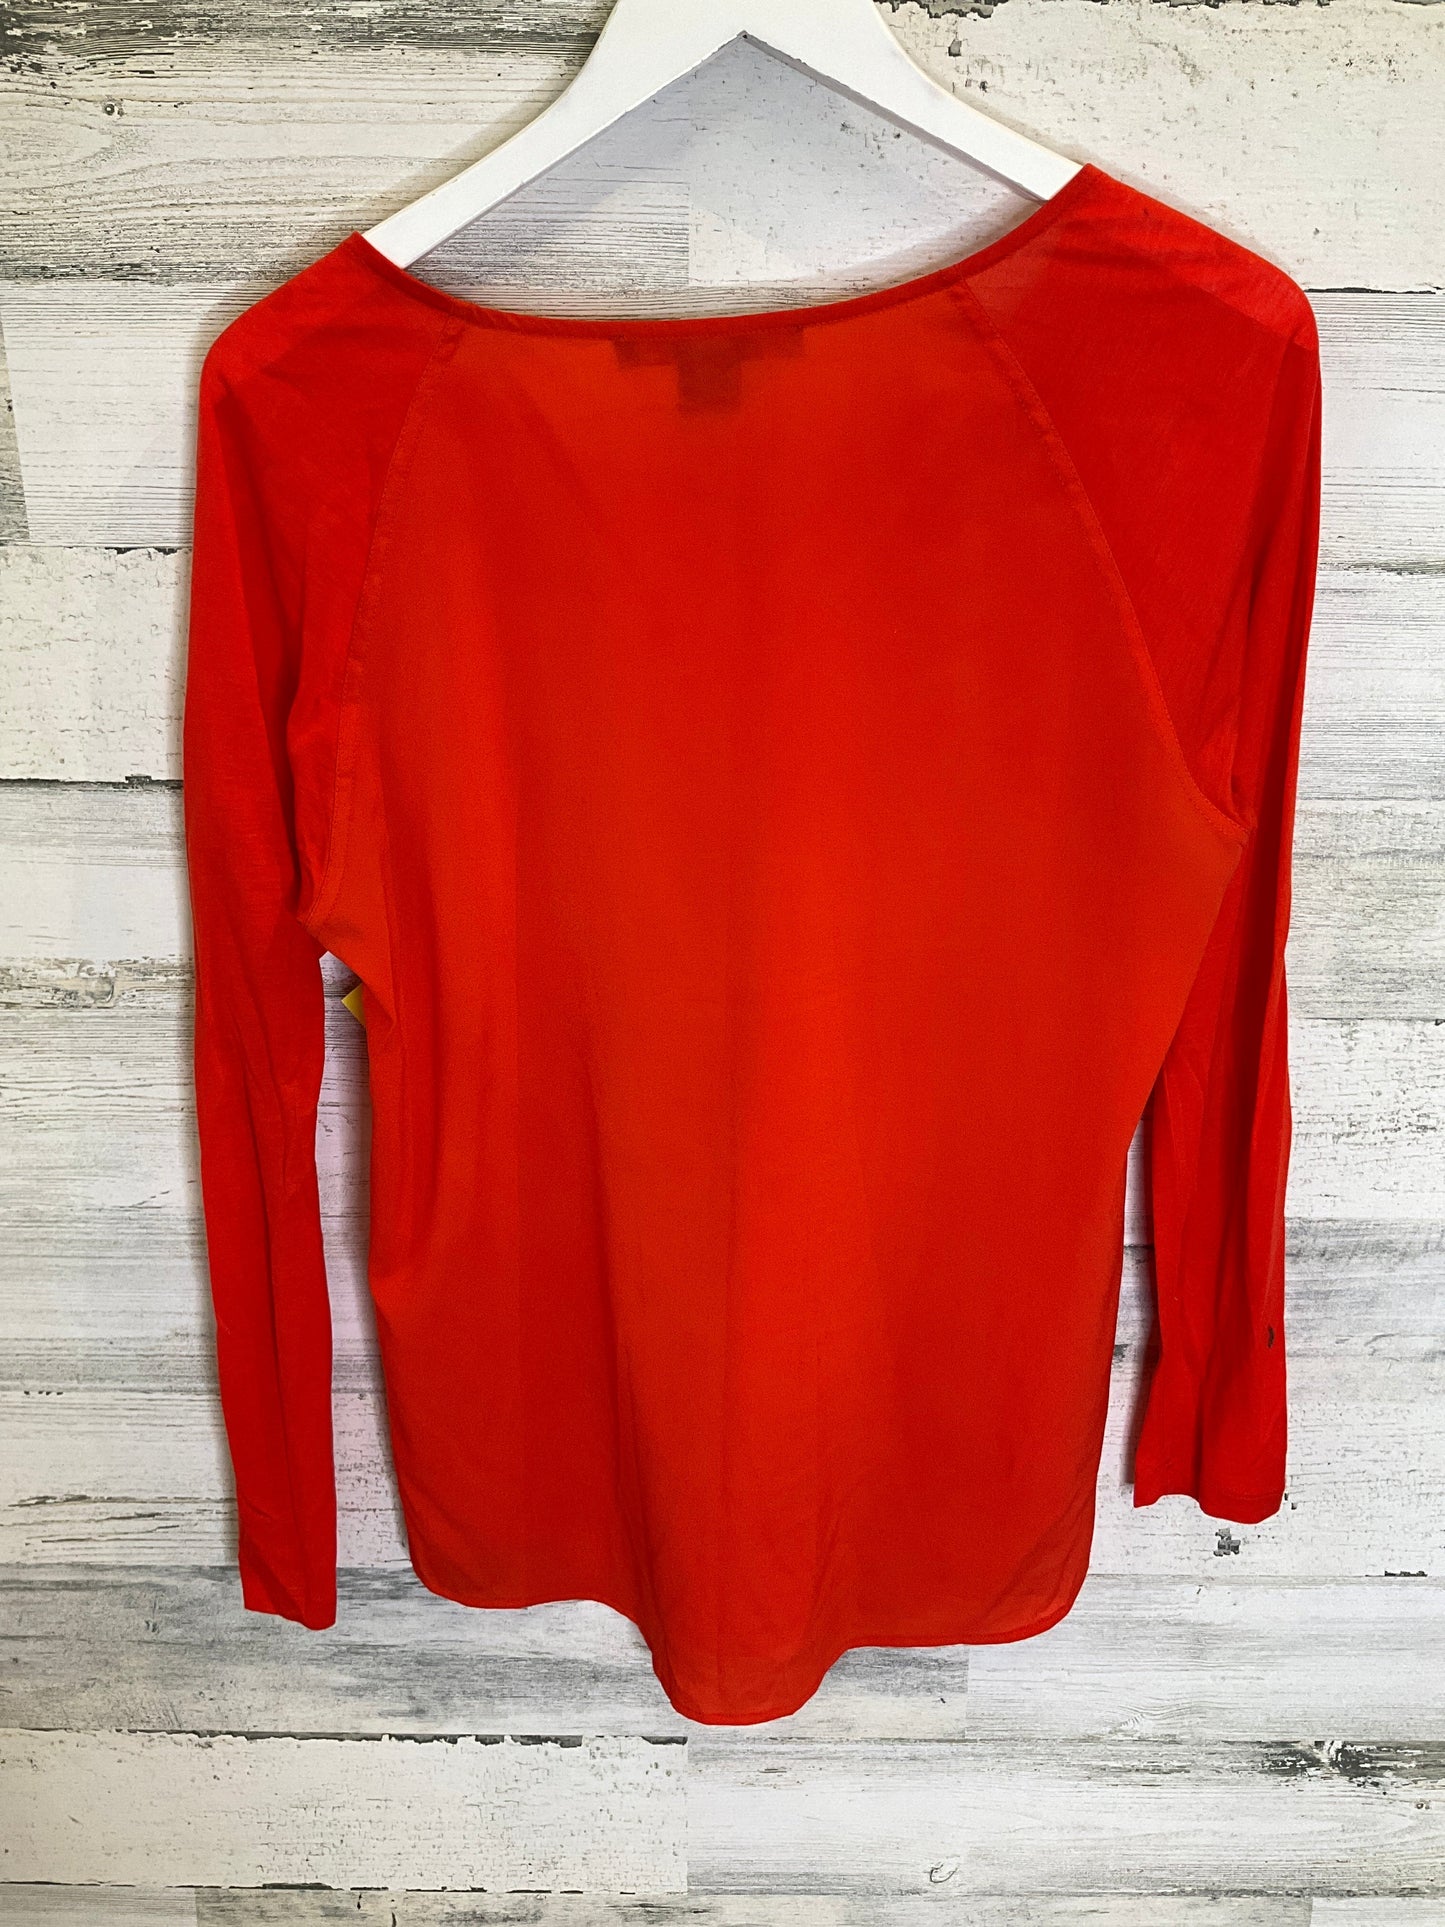 Orange Top Long Sleeve French Connection, Size M